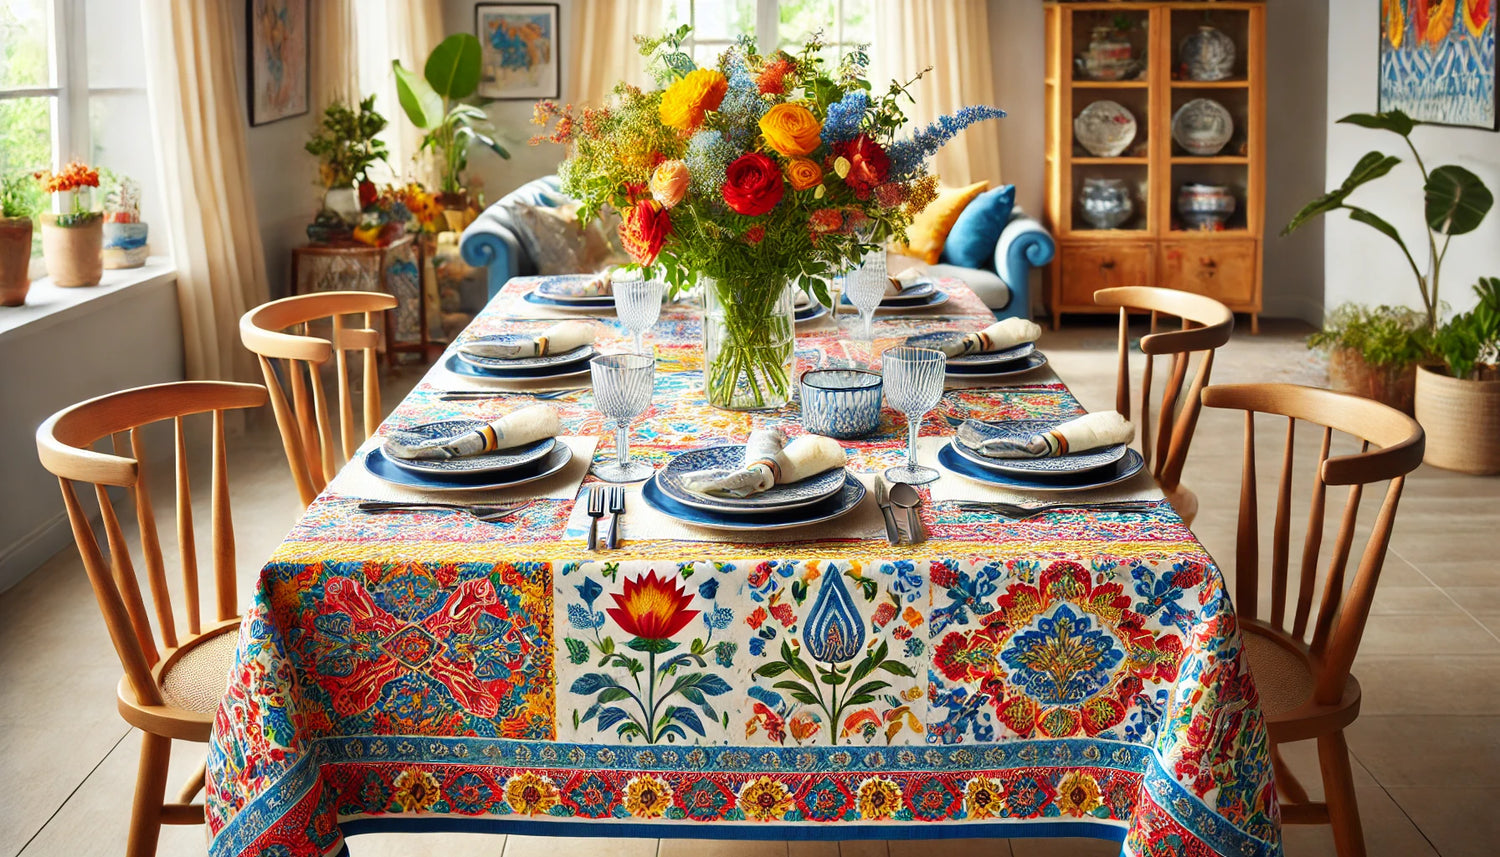 Why Use a Tablecloth? Beyond Elegance, They Offer Practical Perks